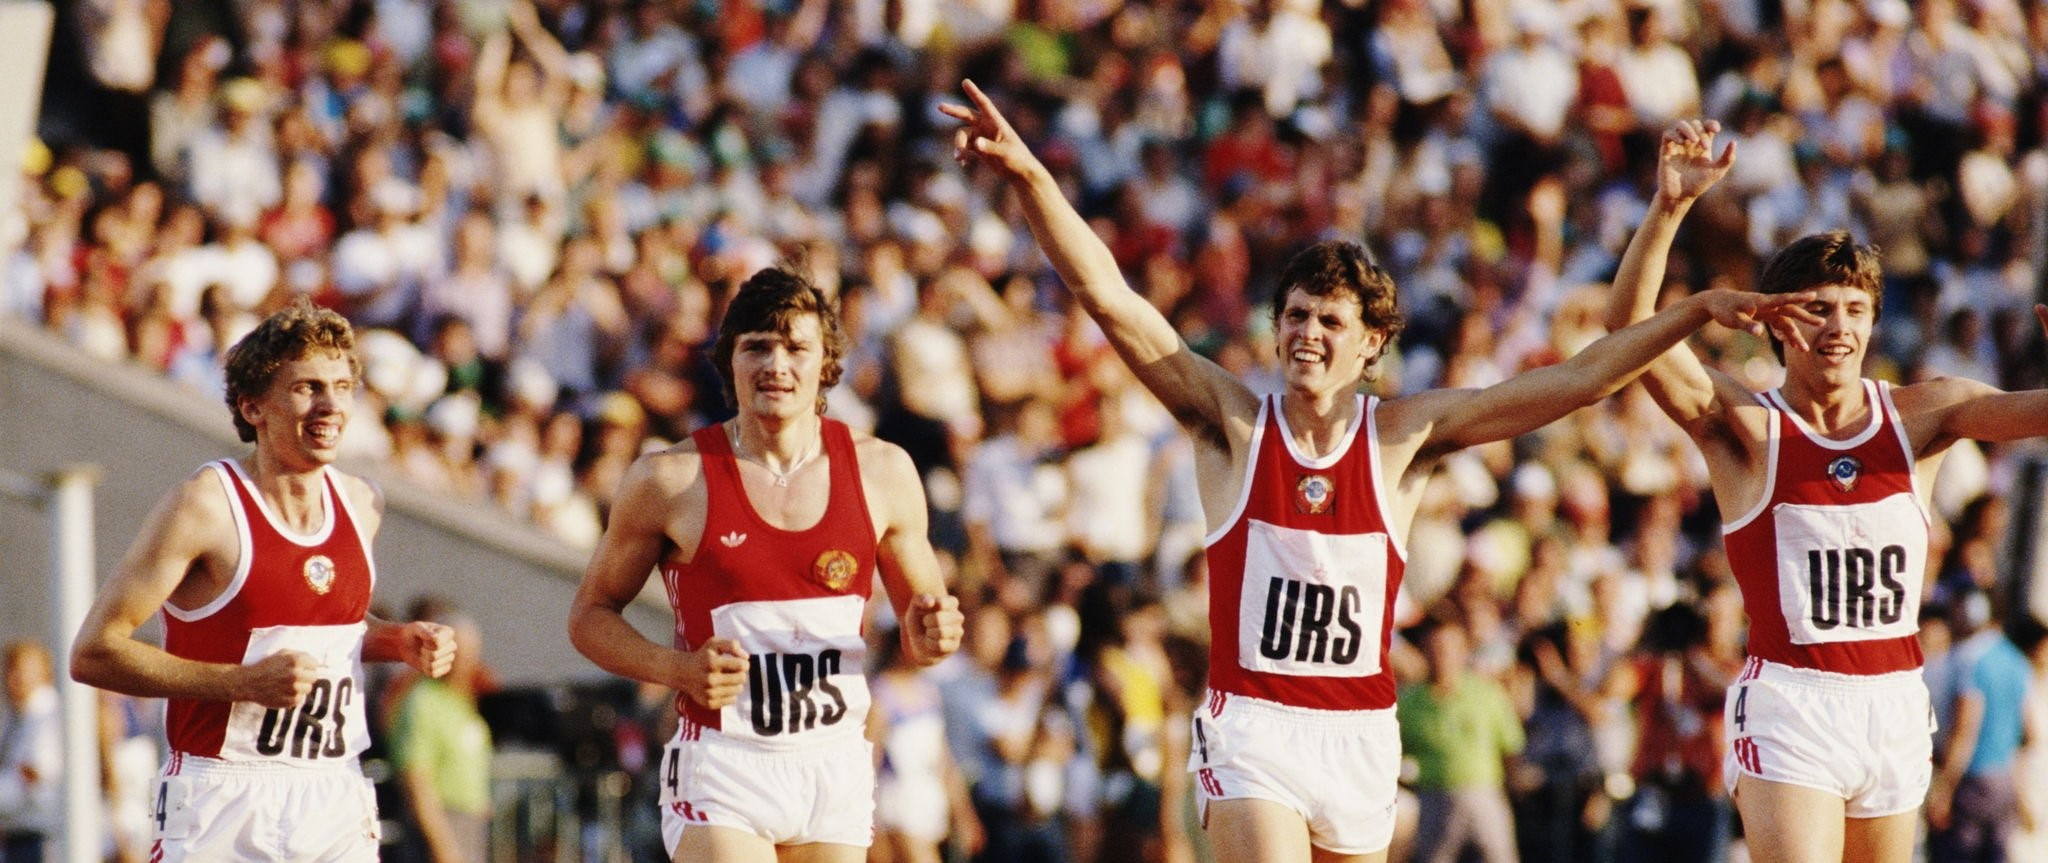 Remigius Valiulis, left, ran the opening leg as the Soviet Union beat East Germany to win the 4x400m relay at the 1980 Olympics in Moscow ©Getty Images